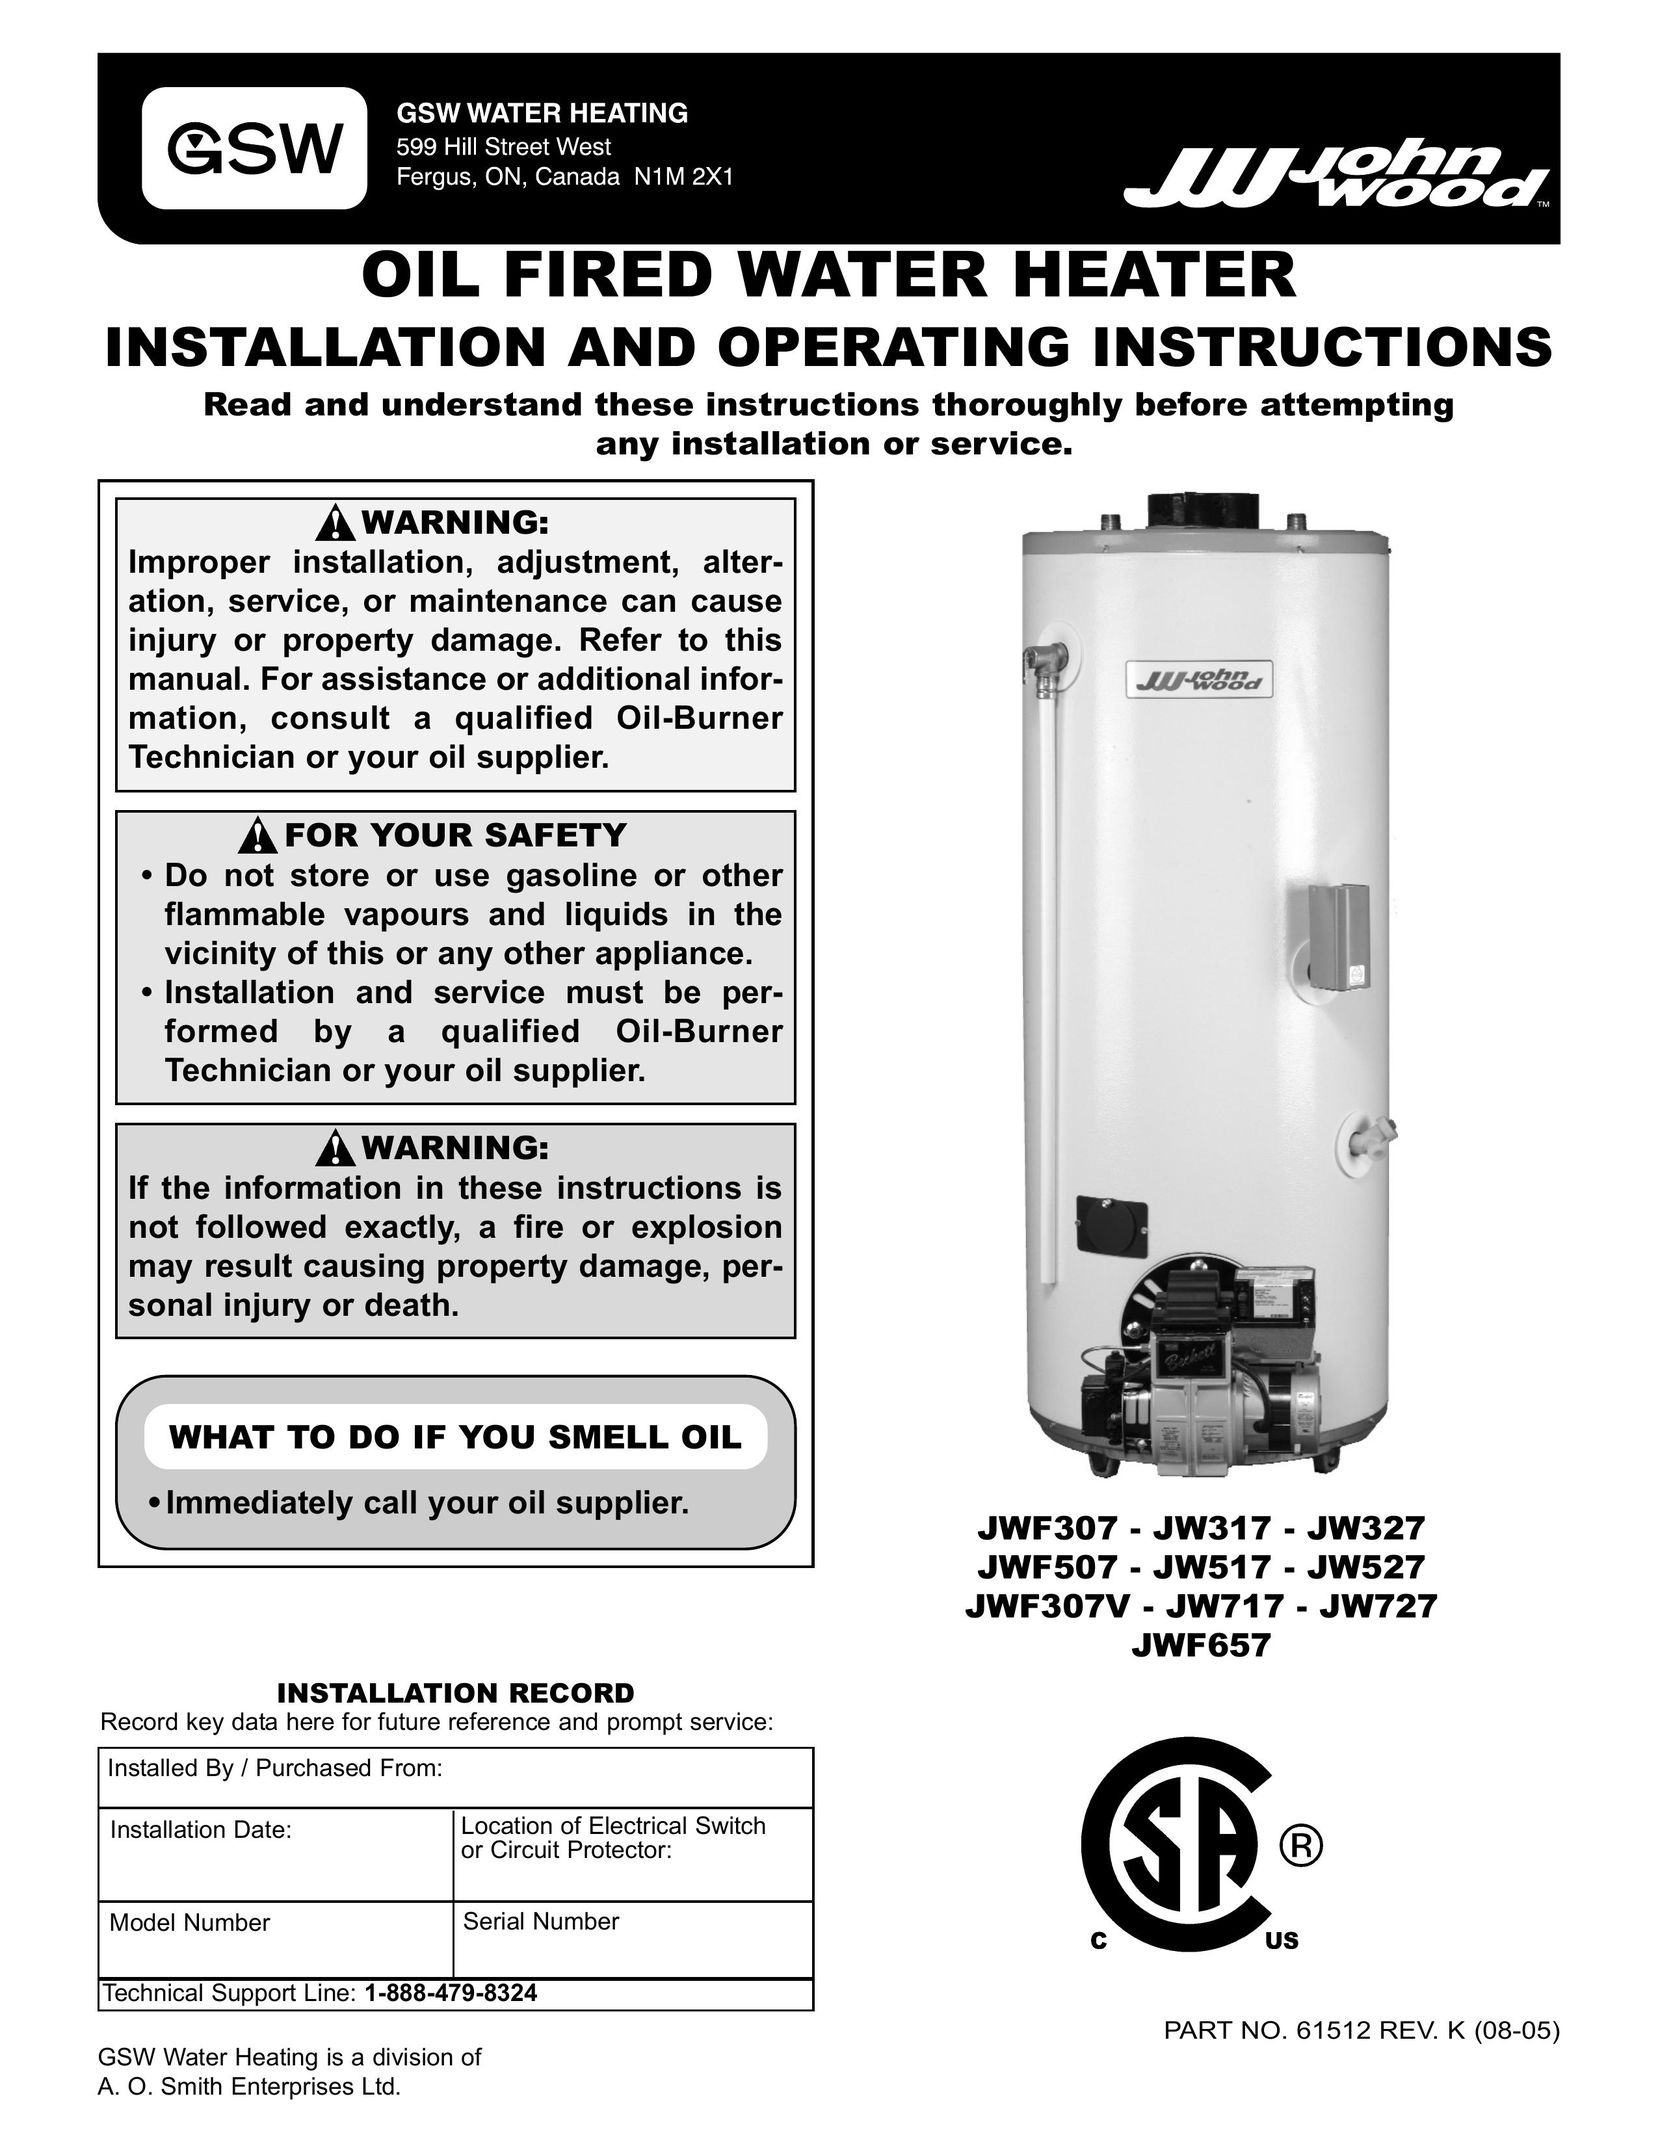 Smith Cast Iron Boilers JW527 Water Heater User Manual